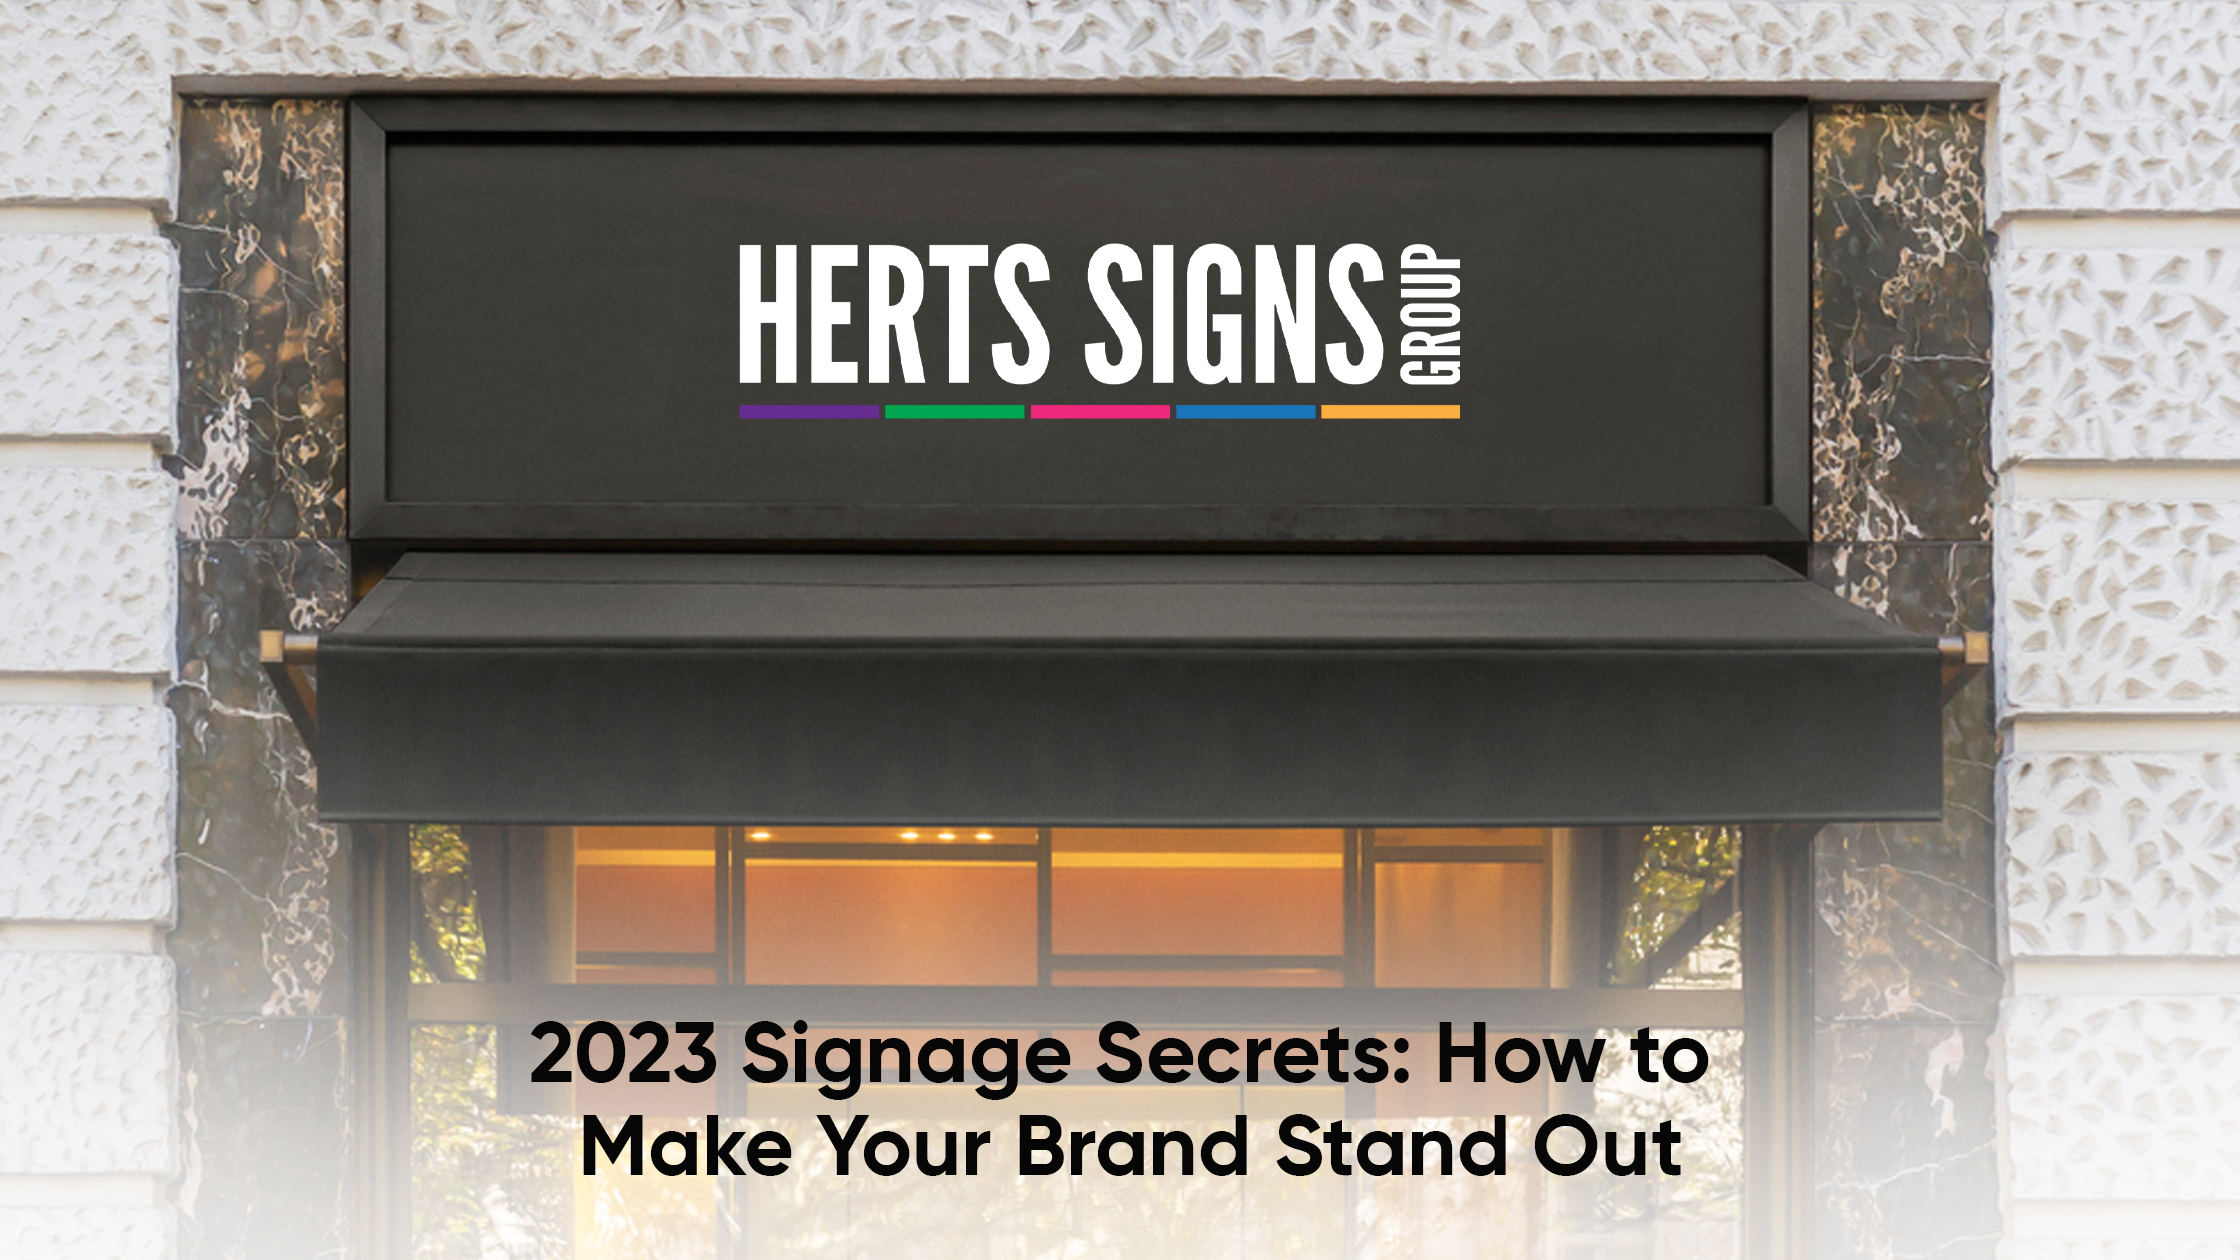 2023 Signage Secrets: How to Make Your Brand Stand Out